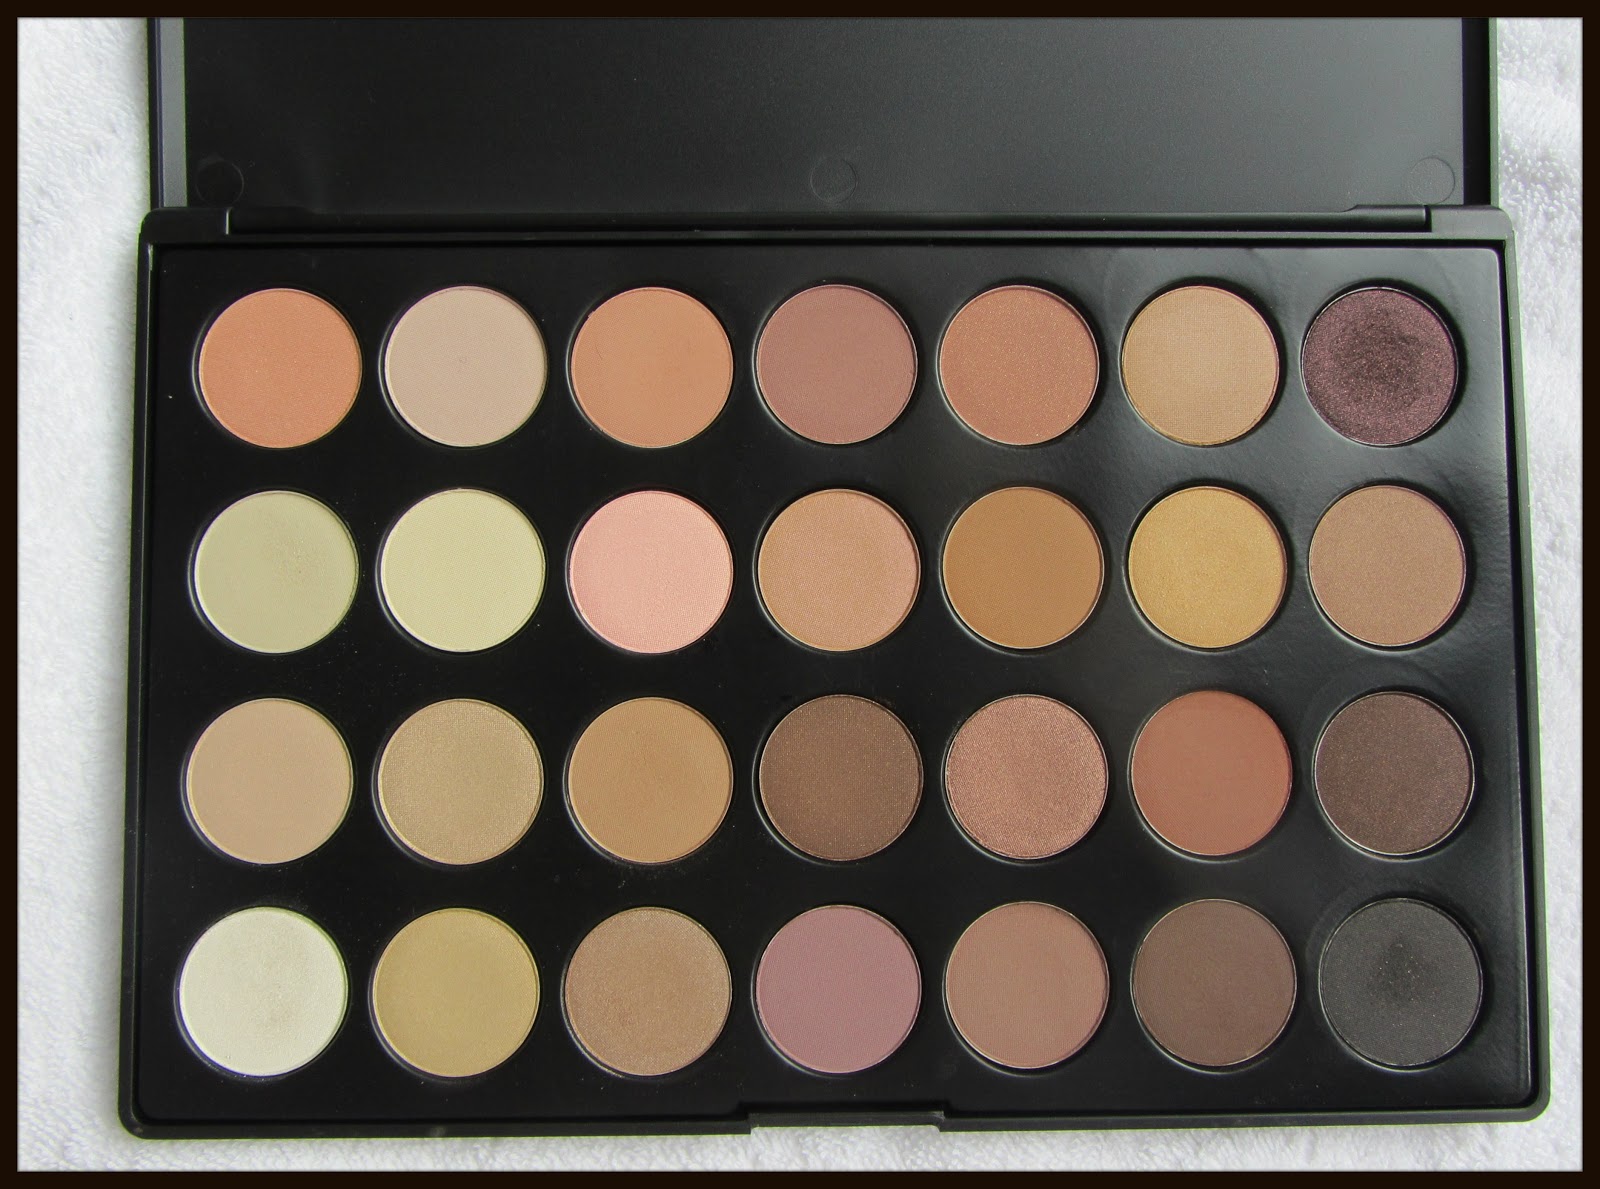 BH COSMETICS | 10 Color Glamorous Blush Palette - Review 